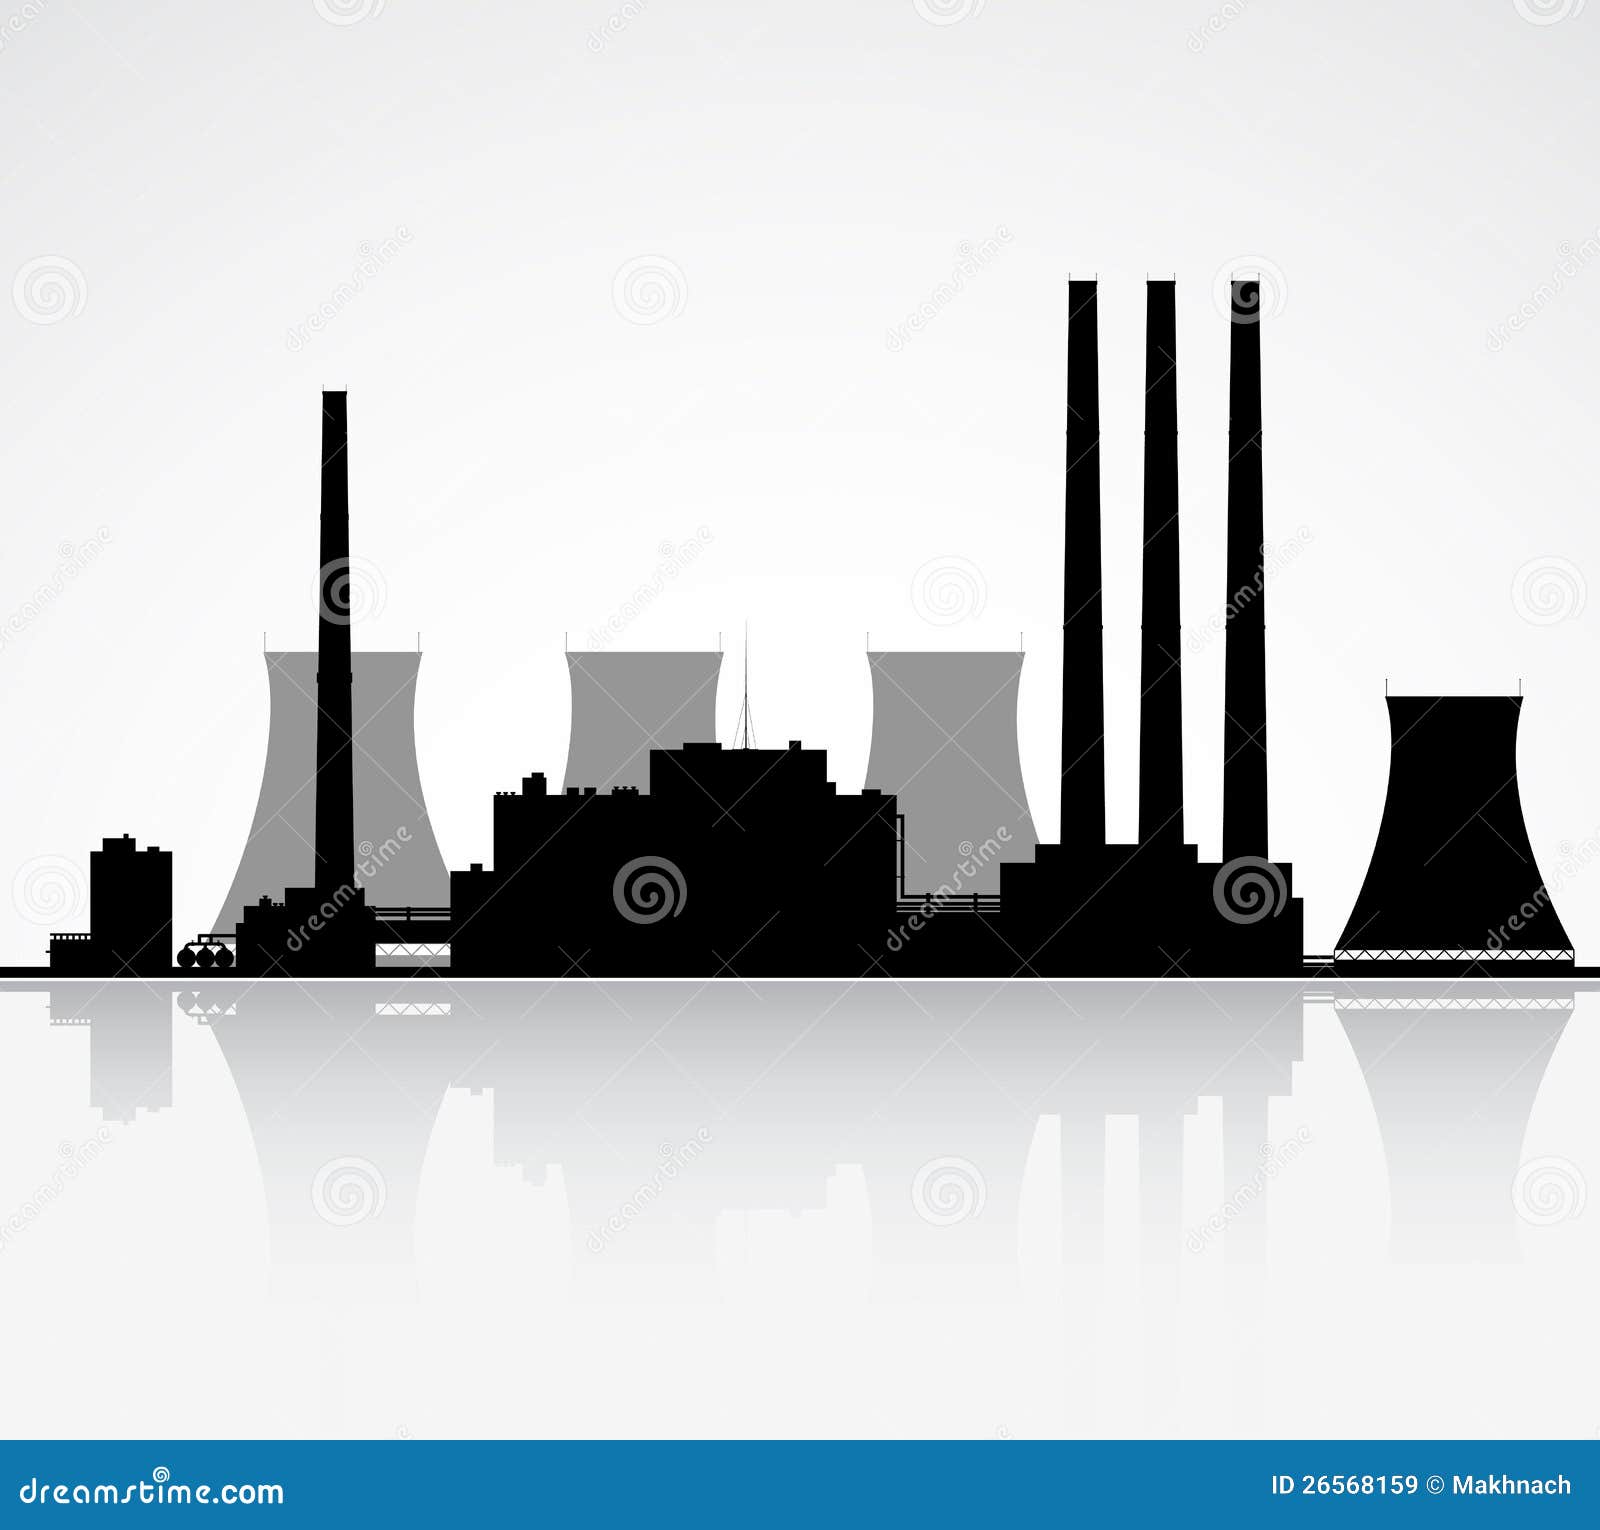 clipart of nuclear power plant - photo #34